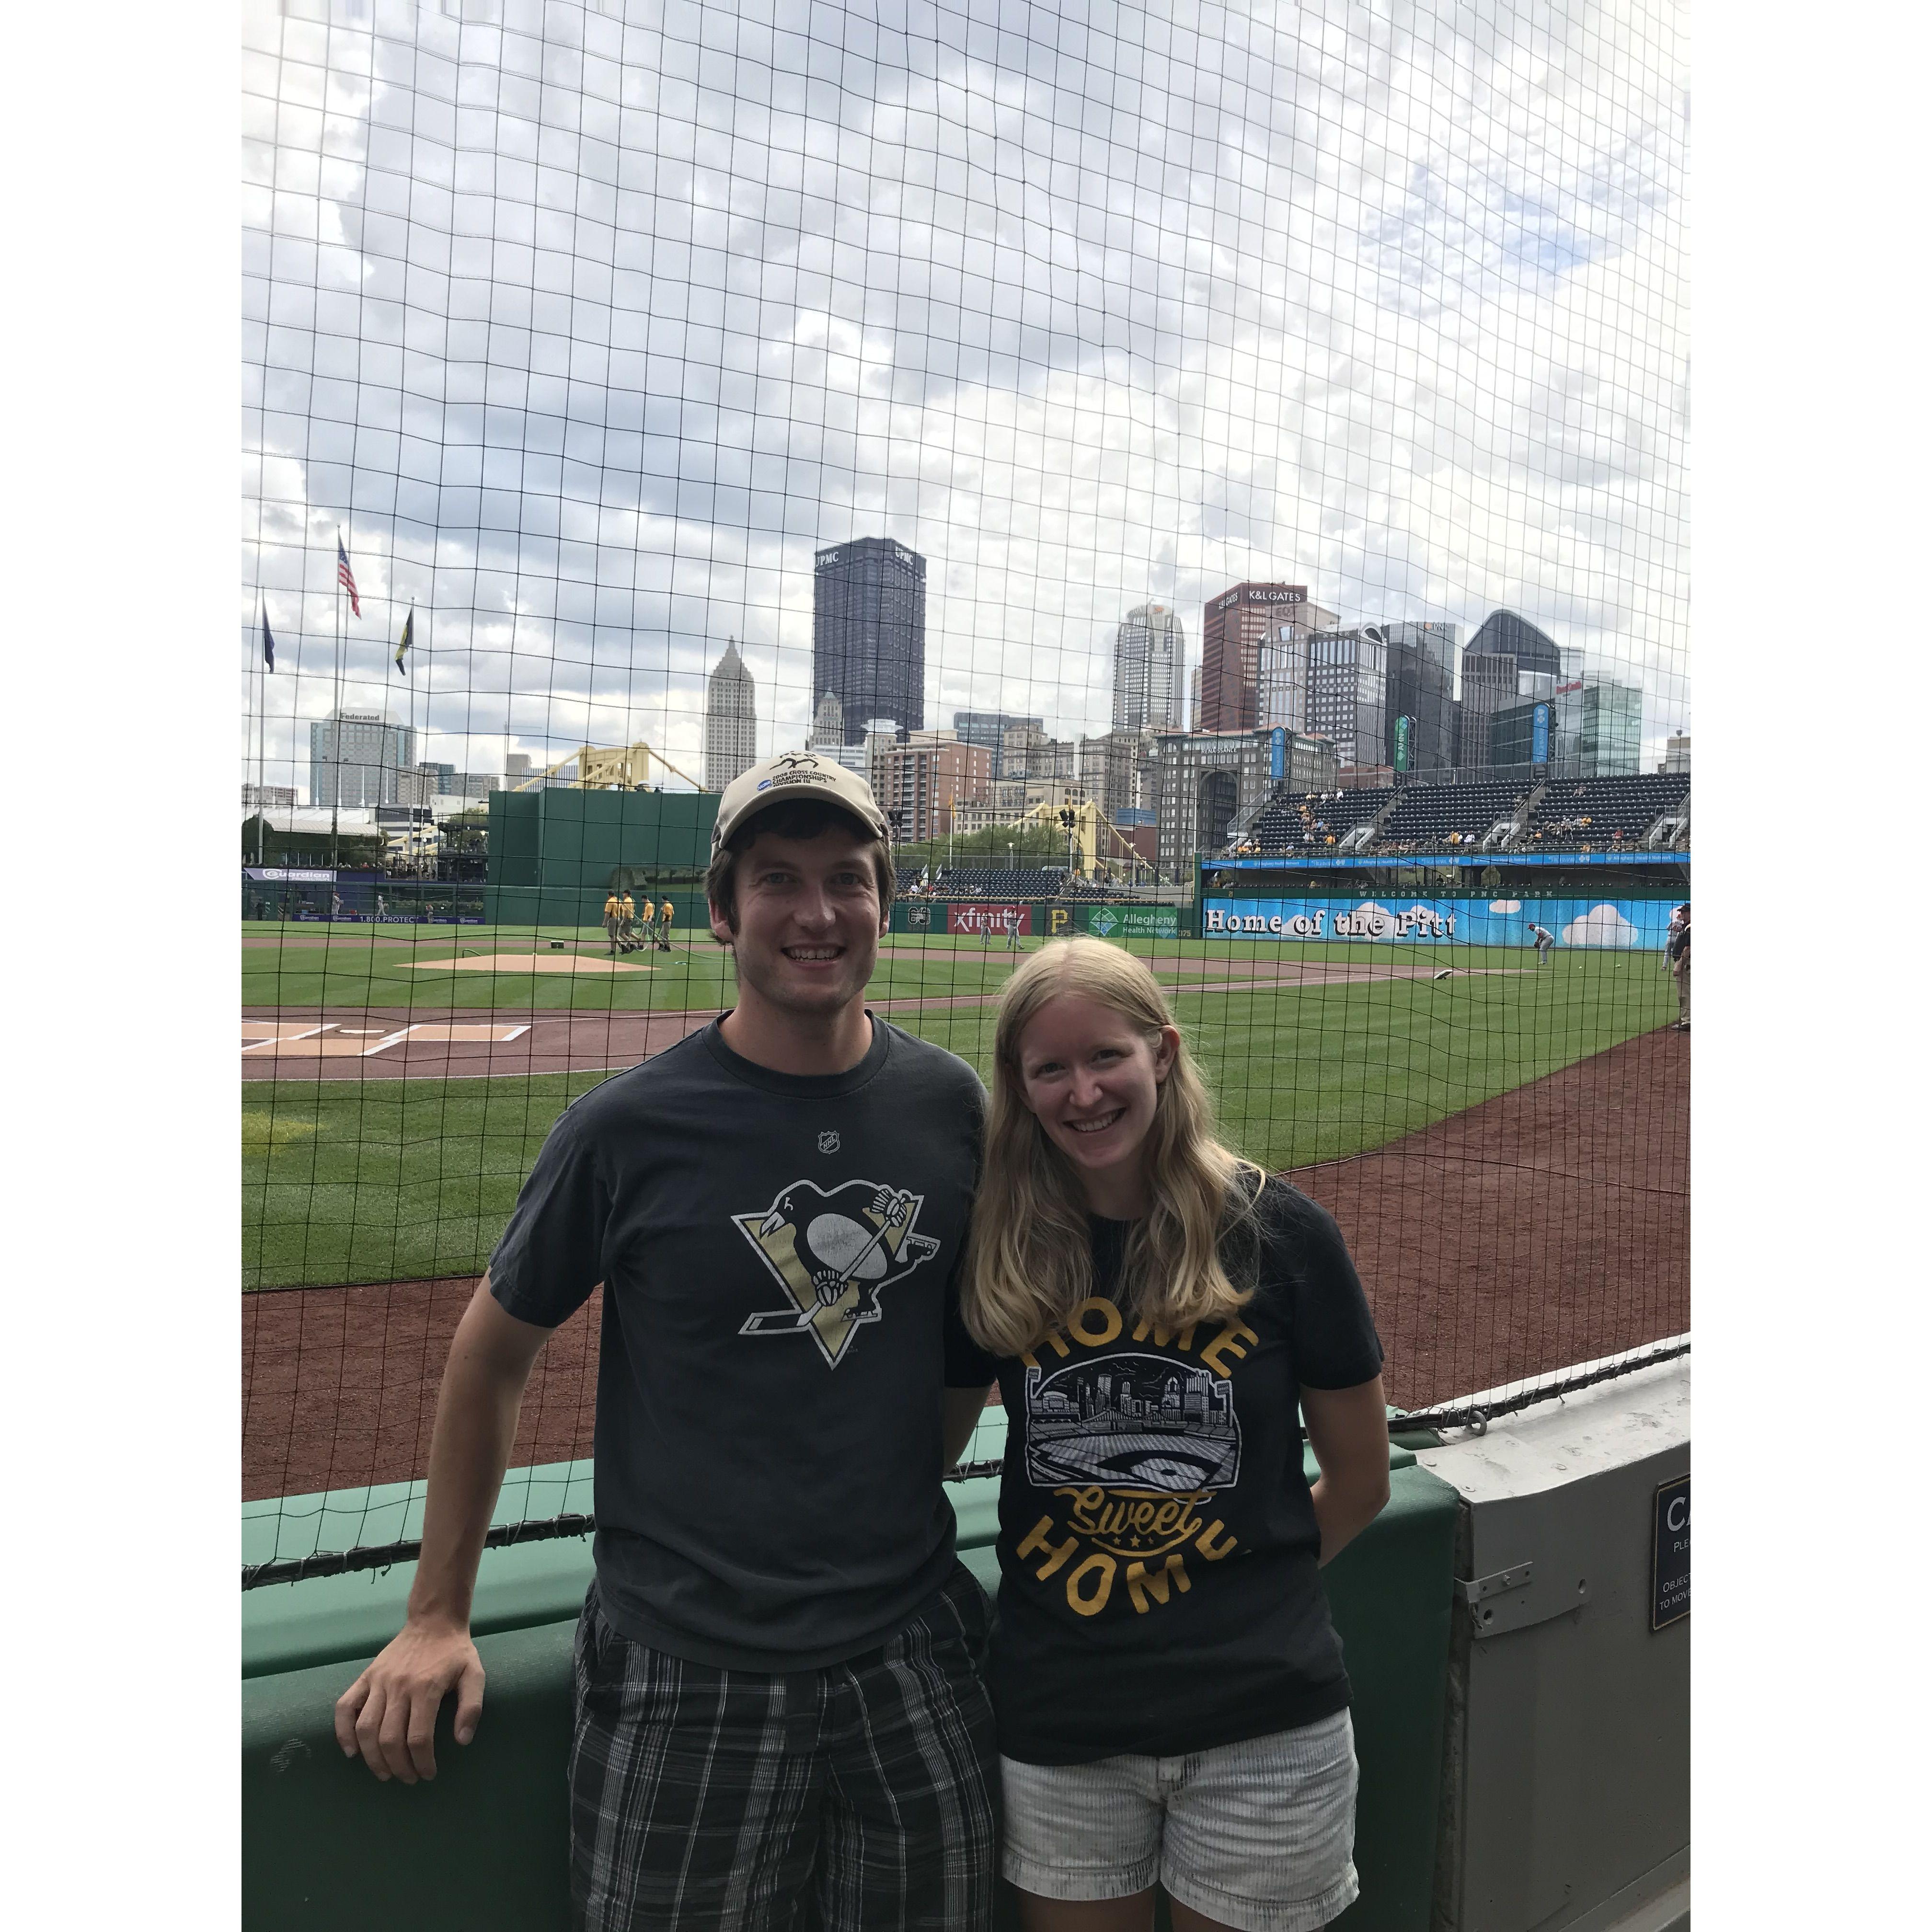 We scored some tickets to the Home Plate Club for a Pittsburgh Pirates game